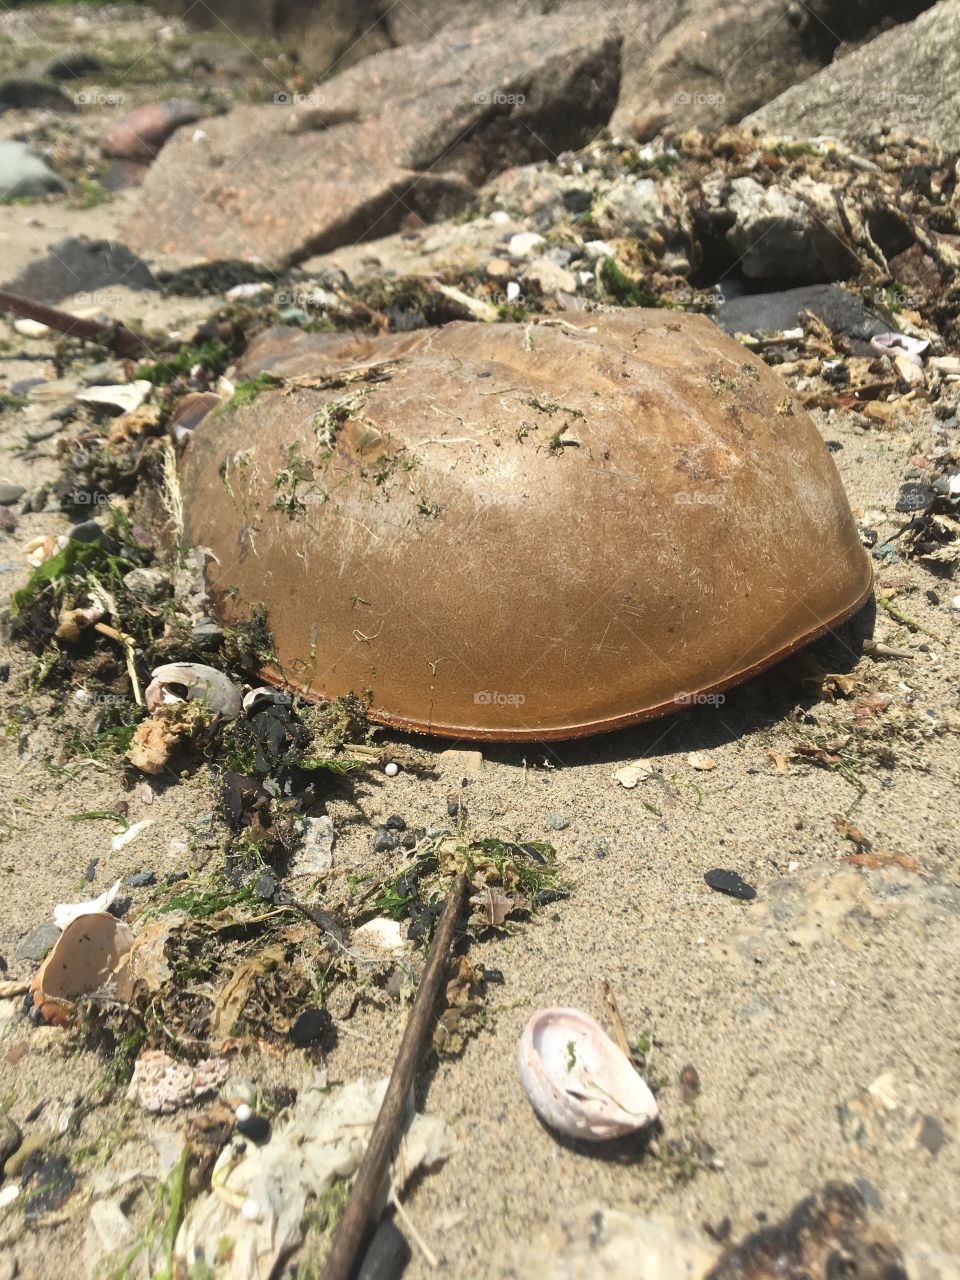 A molt from a female horseshoe crab laying on the detritus on the beach